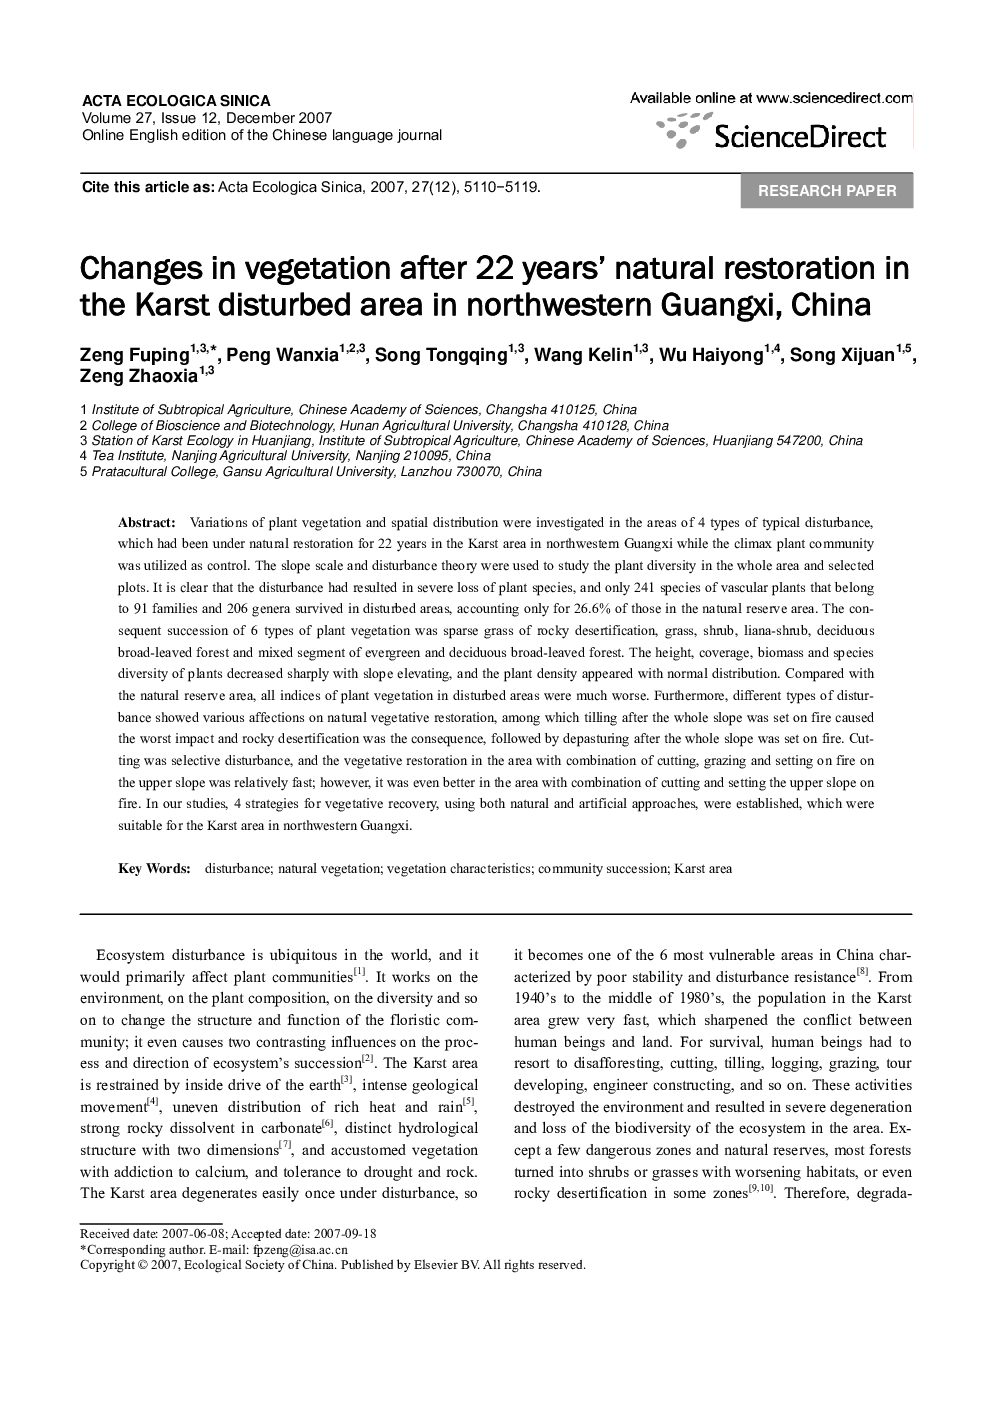 Changes in vegetation after 22 years' natural restoration in the Karst disturbed area in northwestern Guangxi, China